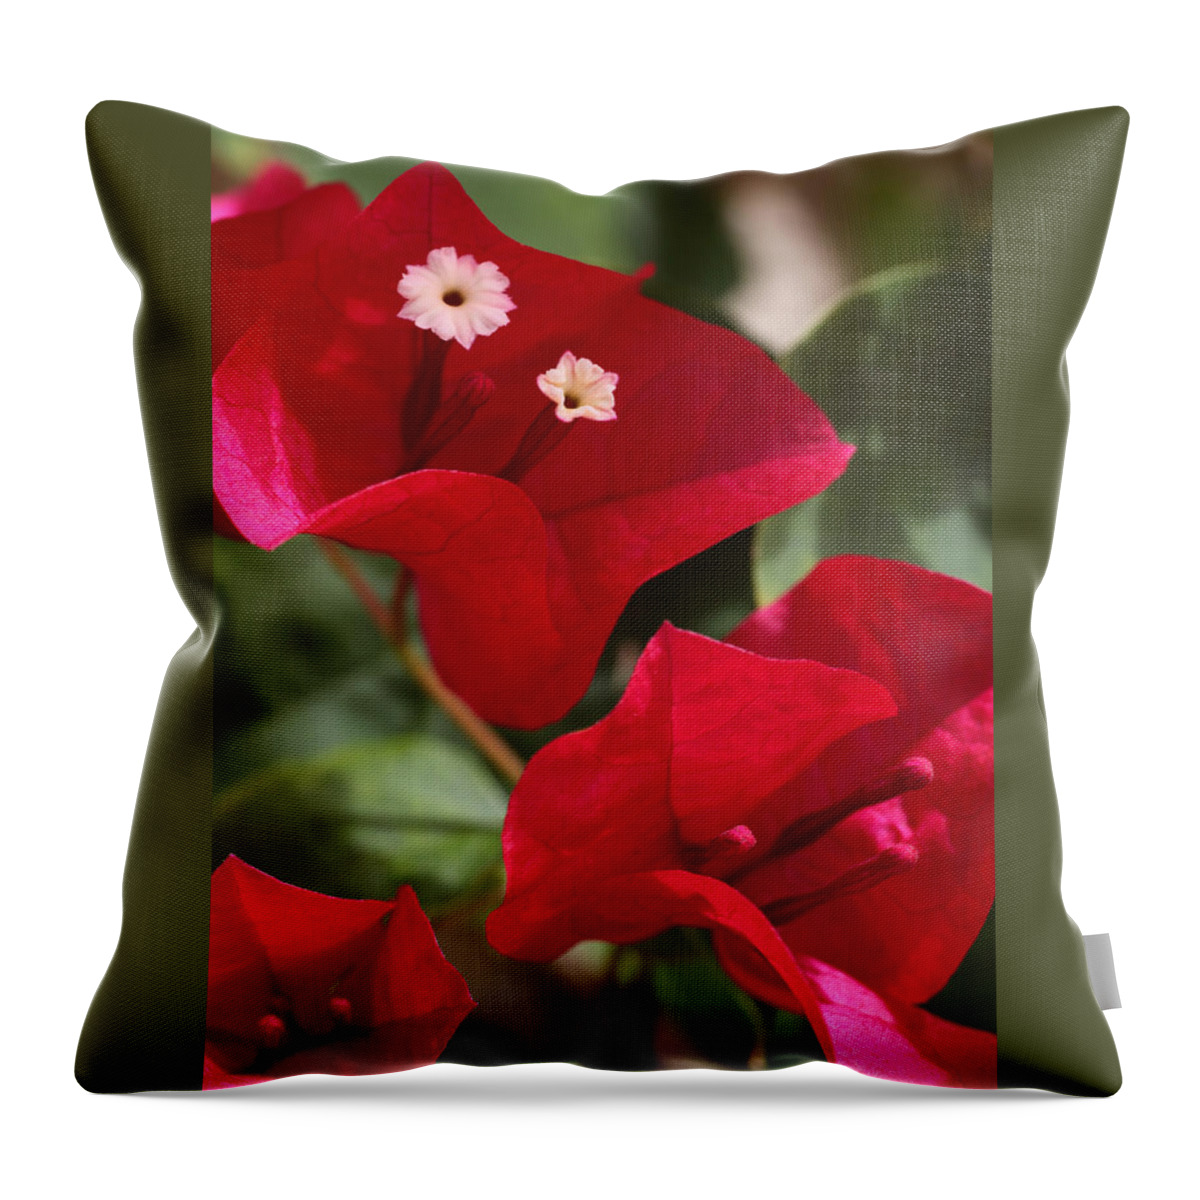 Flower Throw Pillow featuring the photograph Bougainvillea by Tammy Pool